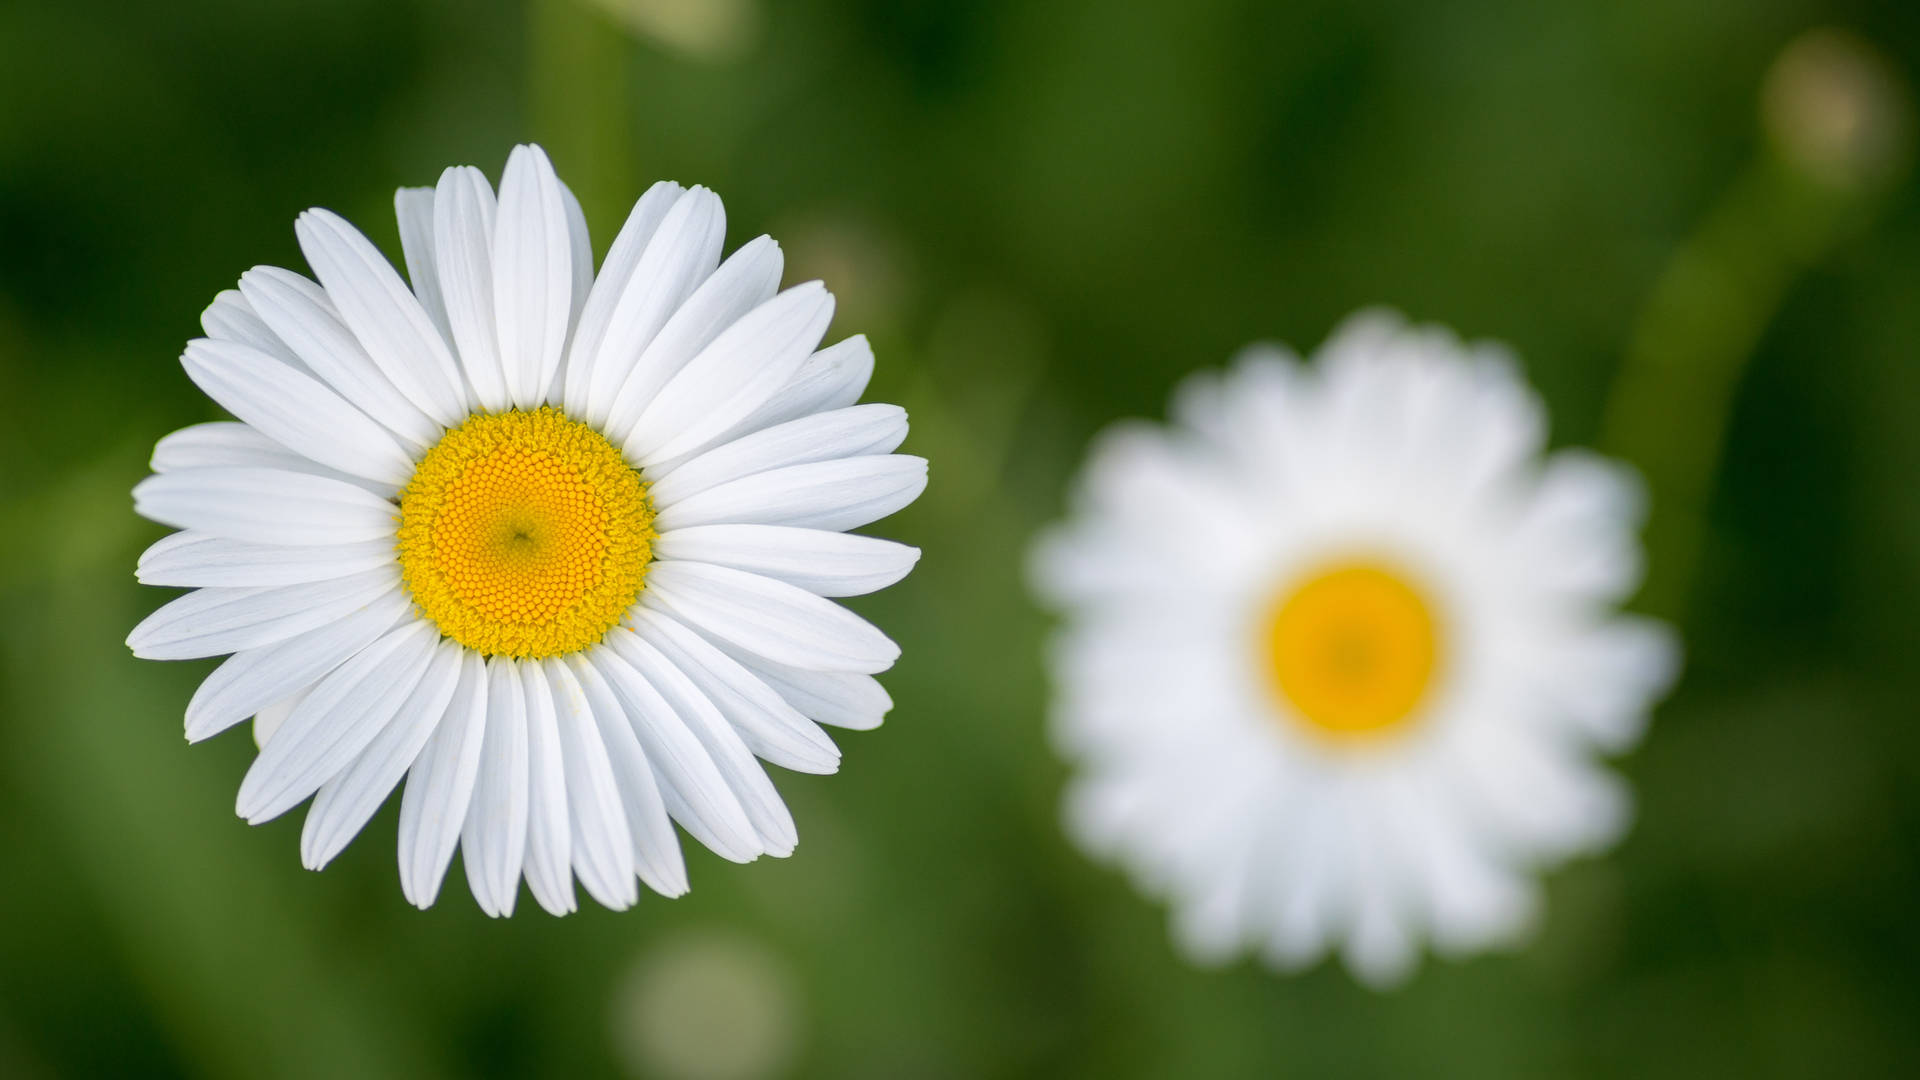 Daisy 6016X3384 Wallpaper and Background Image